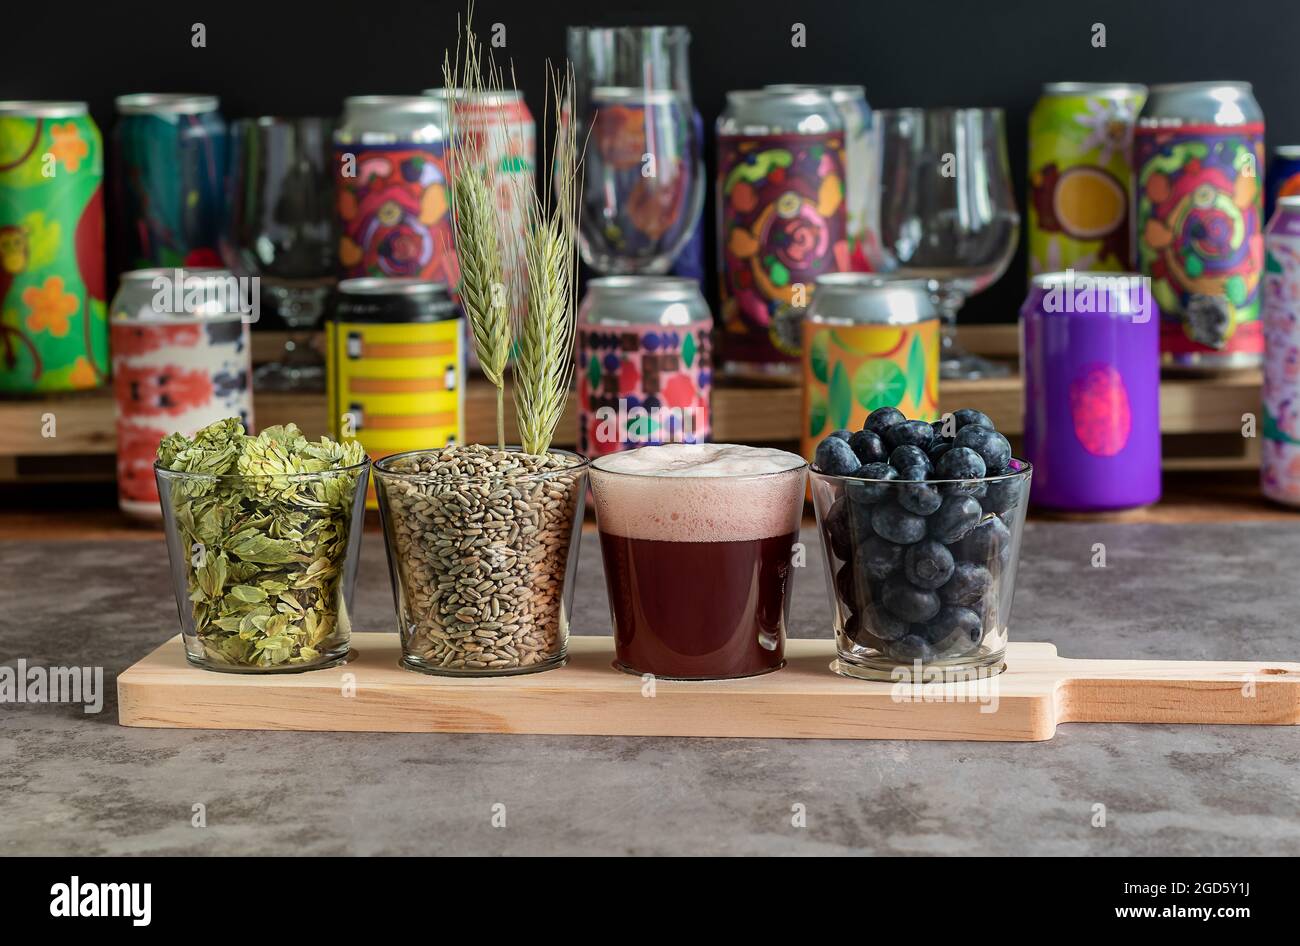 Sour fruited blueberry IPA with ingredients. Wooden board for flight set craft beer tasting Stock Photo